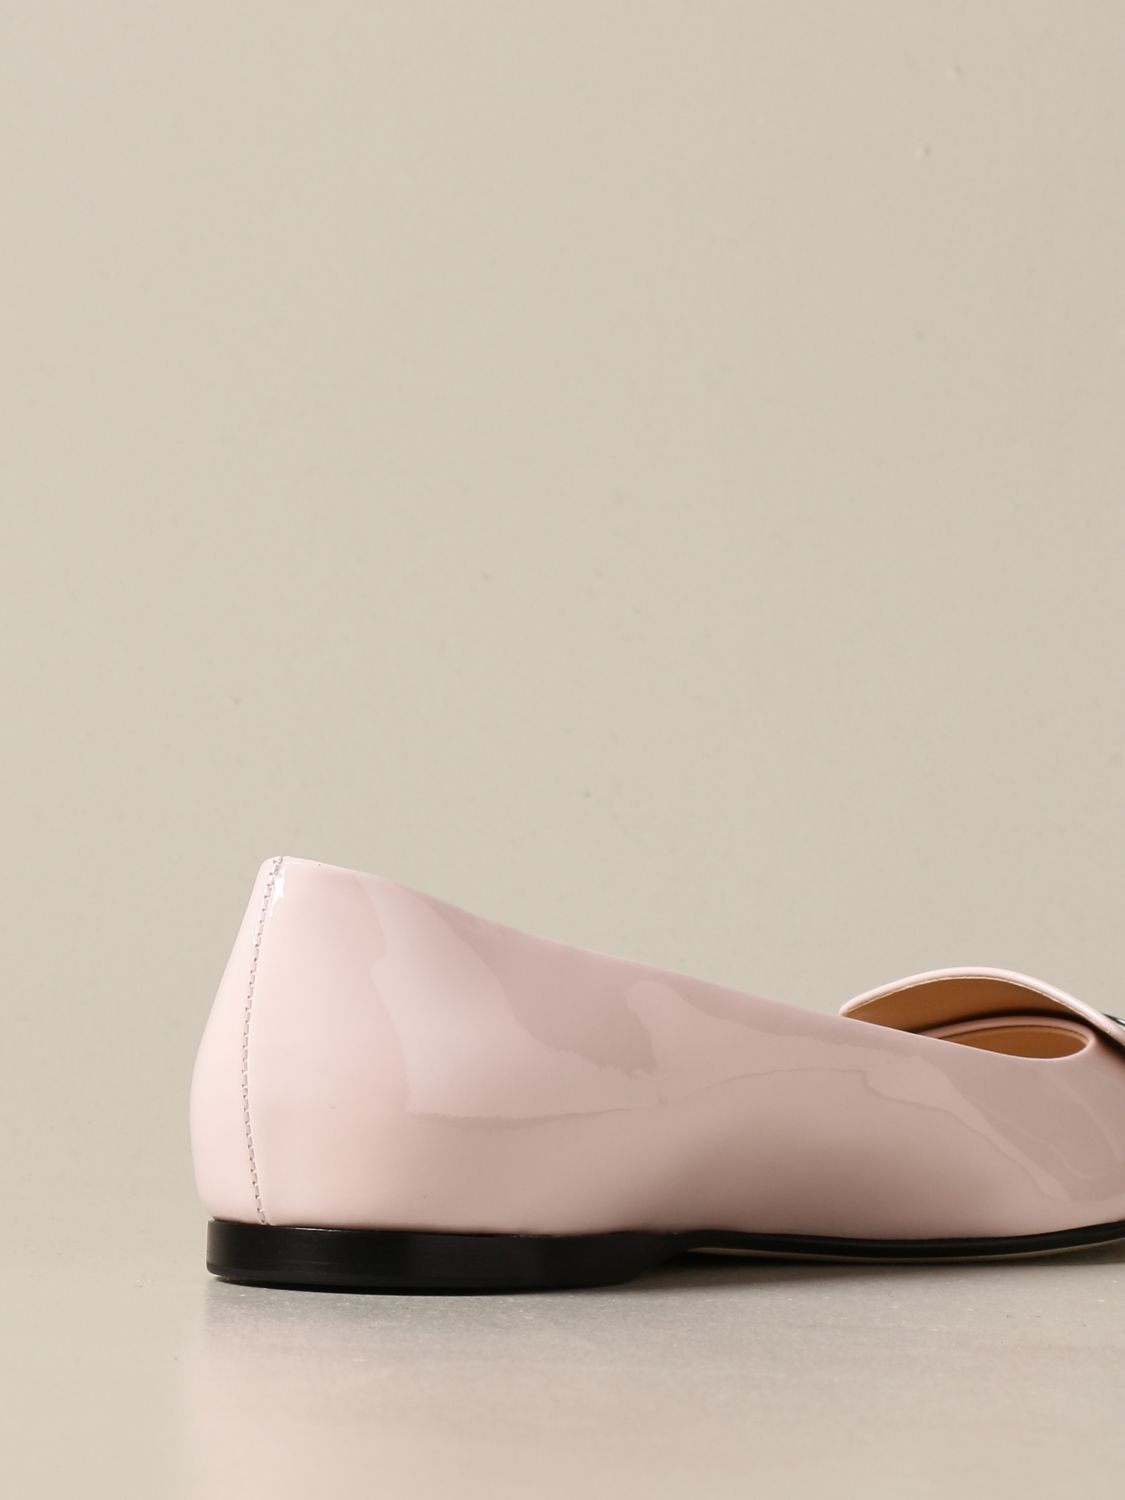 Patent leather ballet flats Louis Vuitton Pink size 41 EU in Patent leather  - 31278550